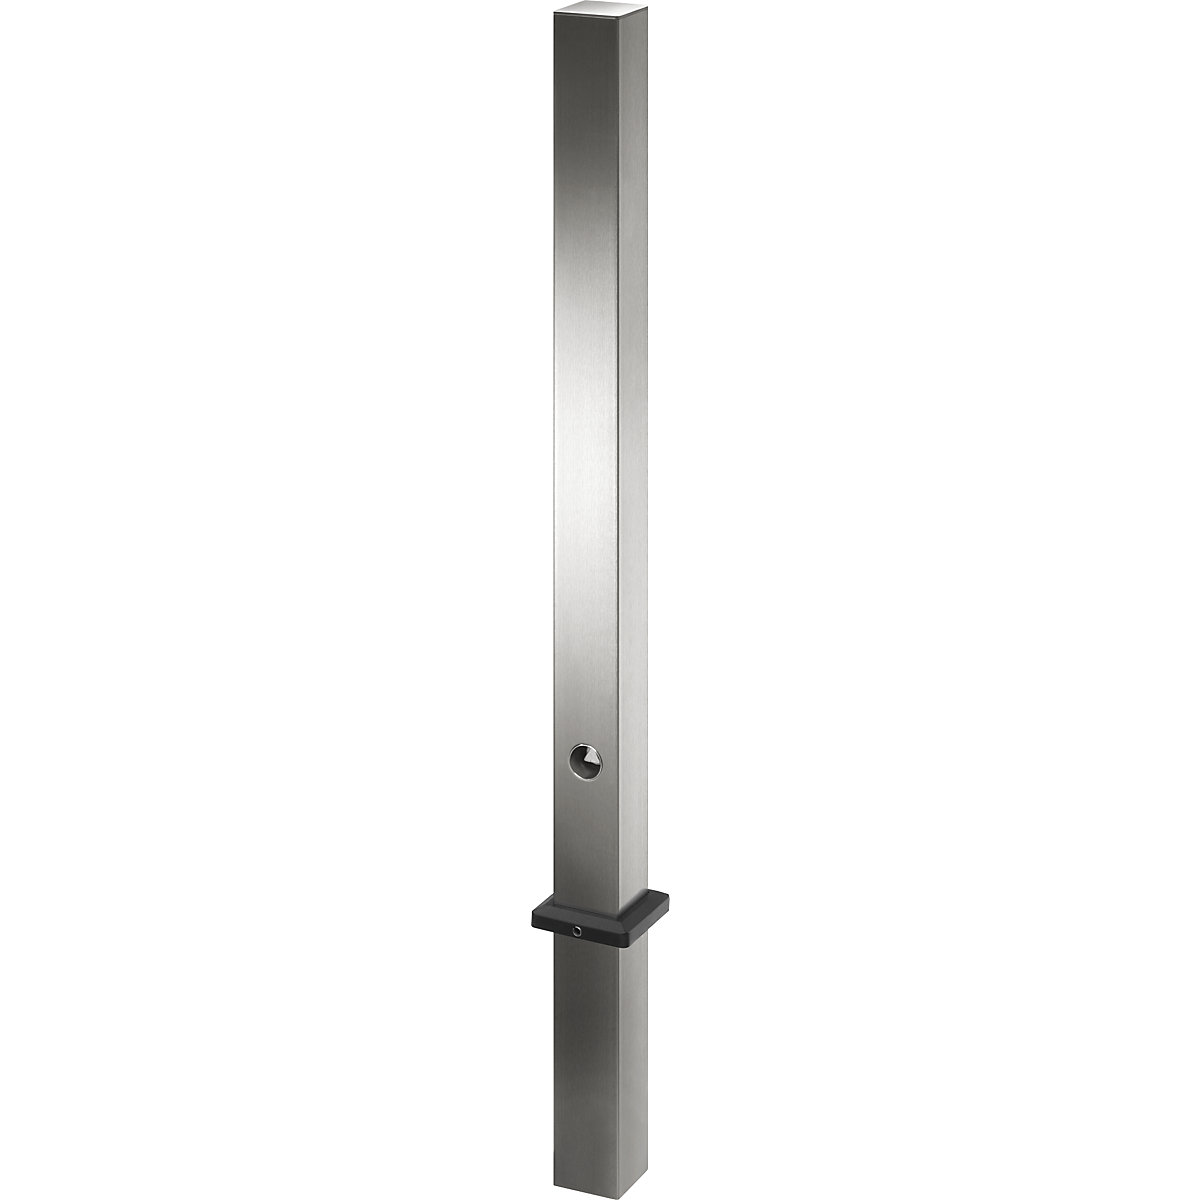 Stainless steel barrier post, with flat head, ground sleeve for concreting in, 70 x 70 mm-12